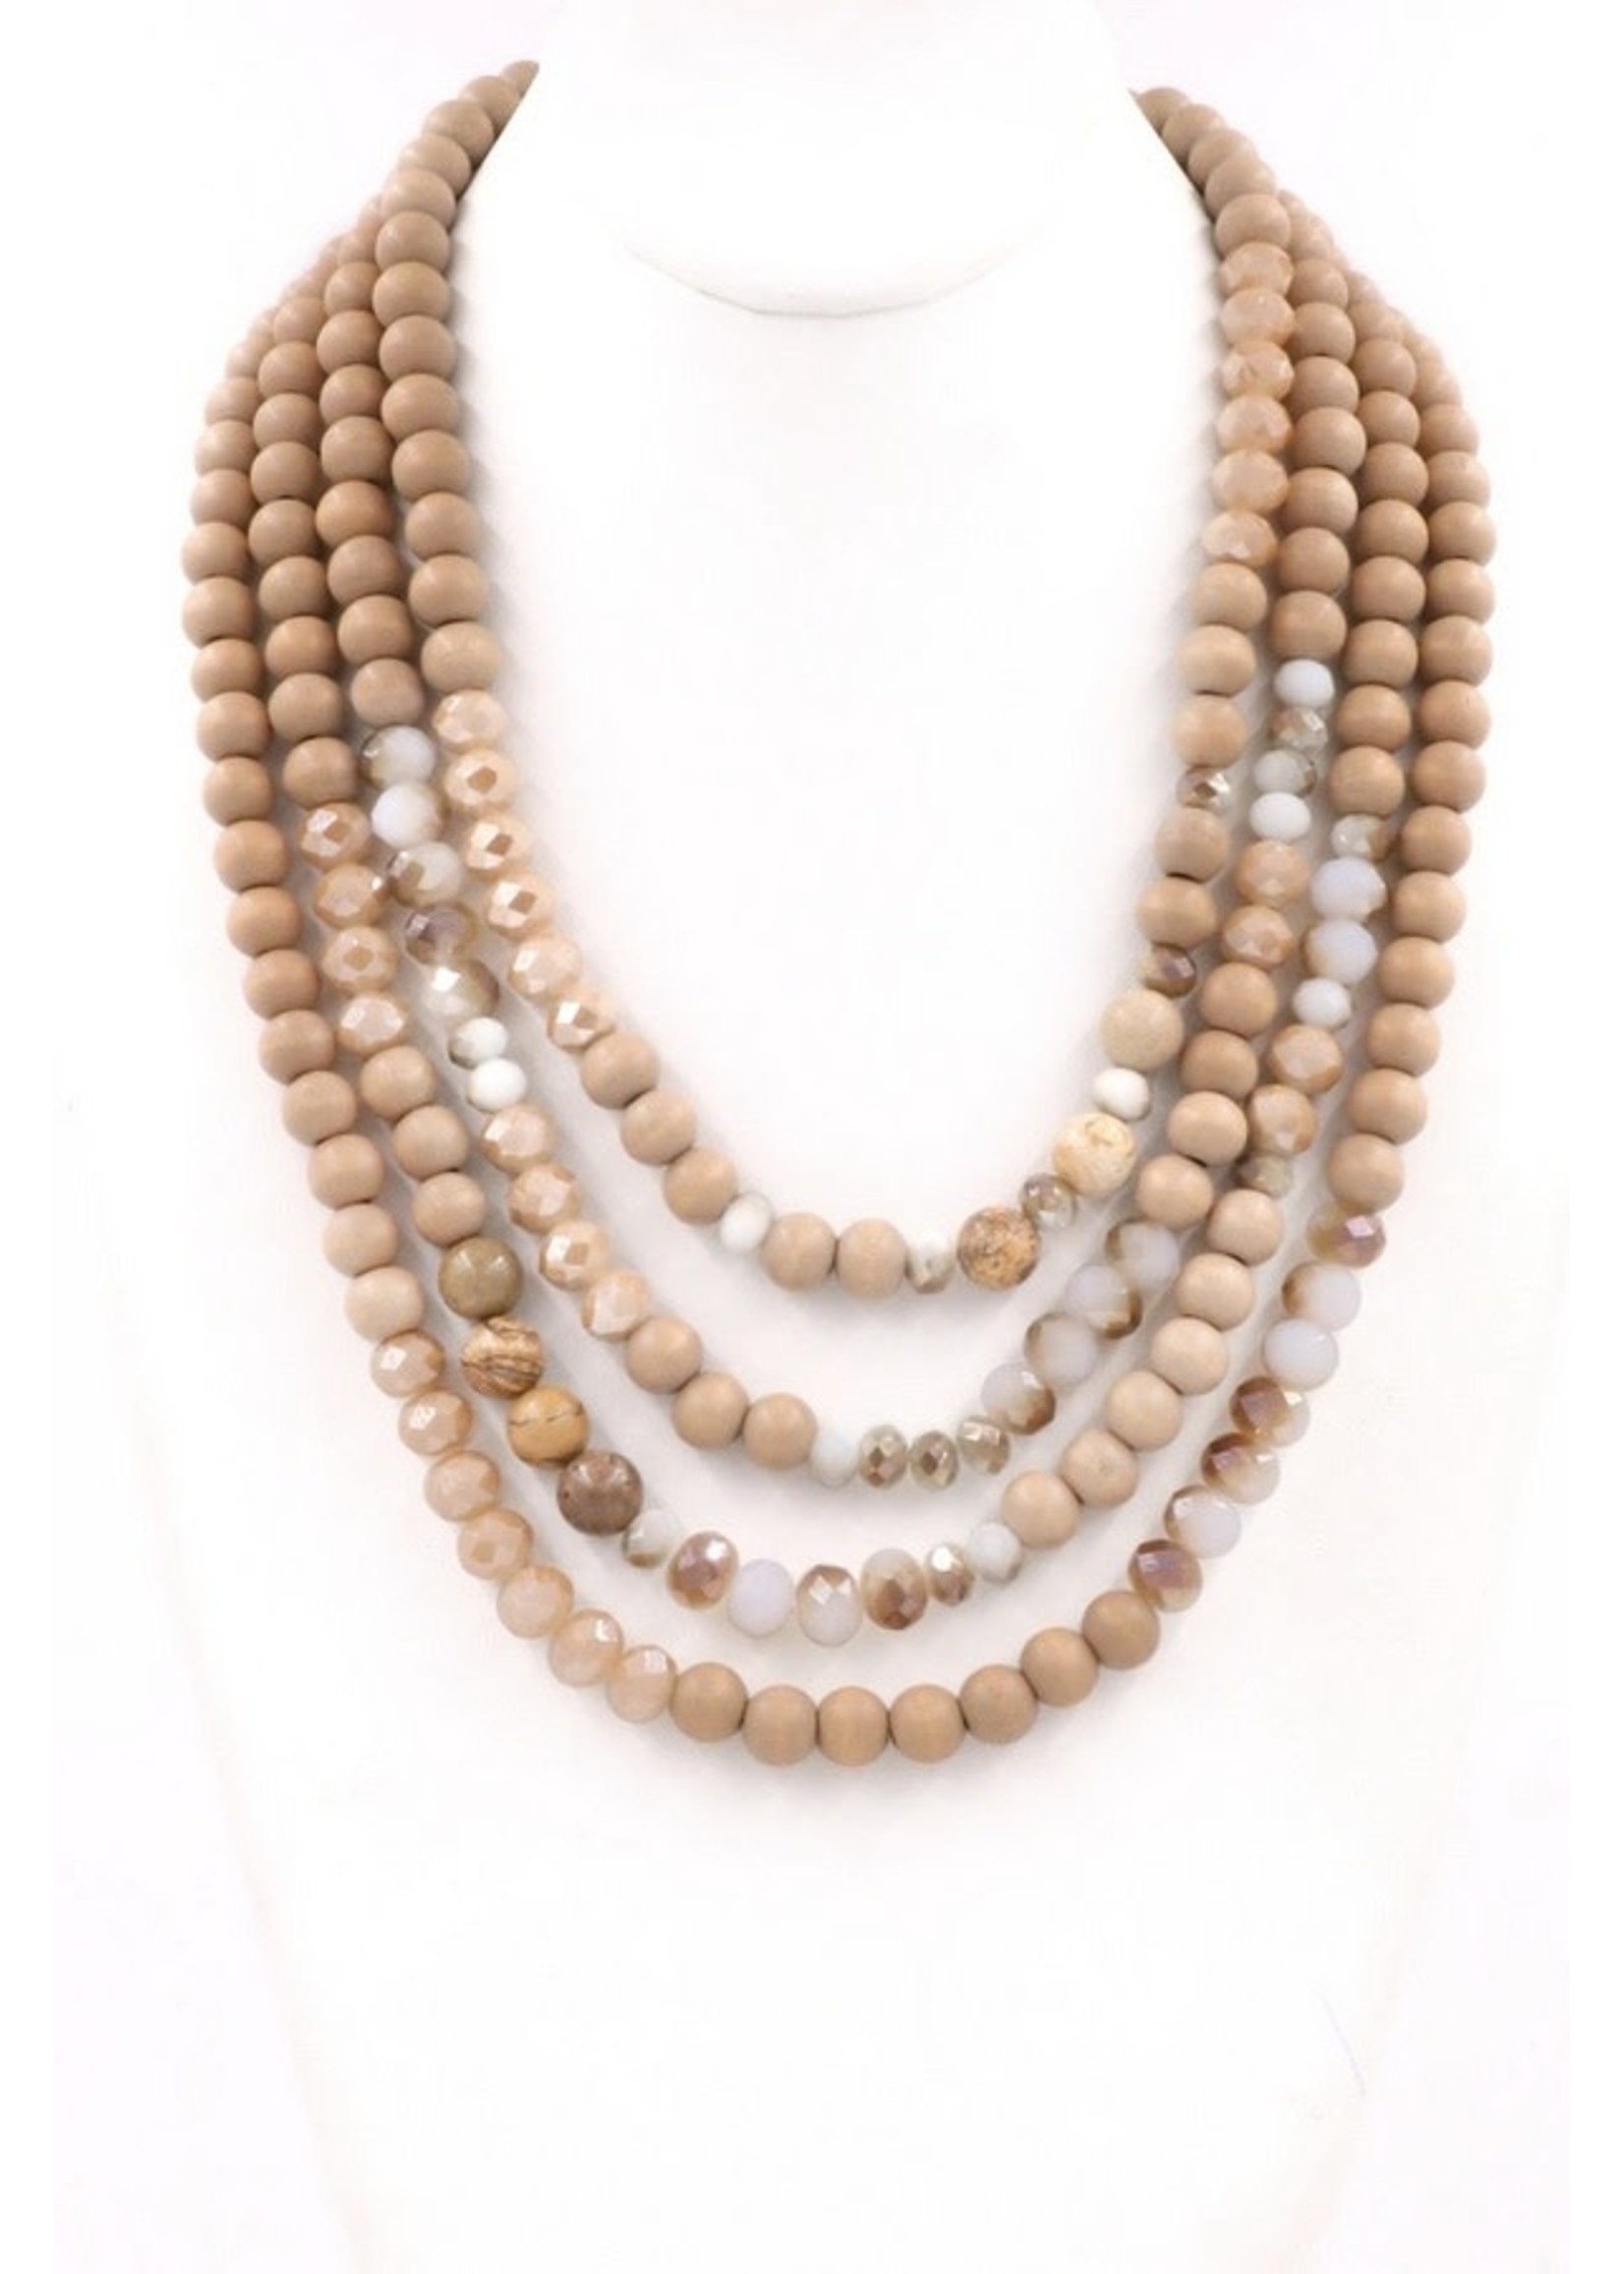 Bead Layered Necklace 17" Long in 4 colors